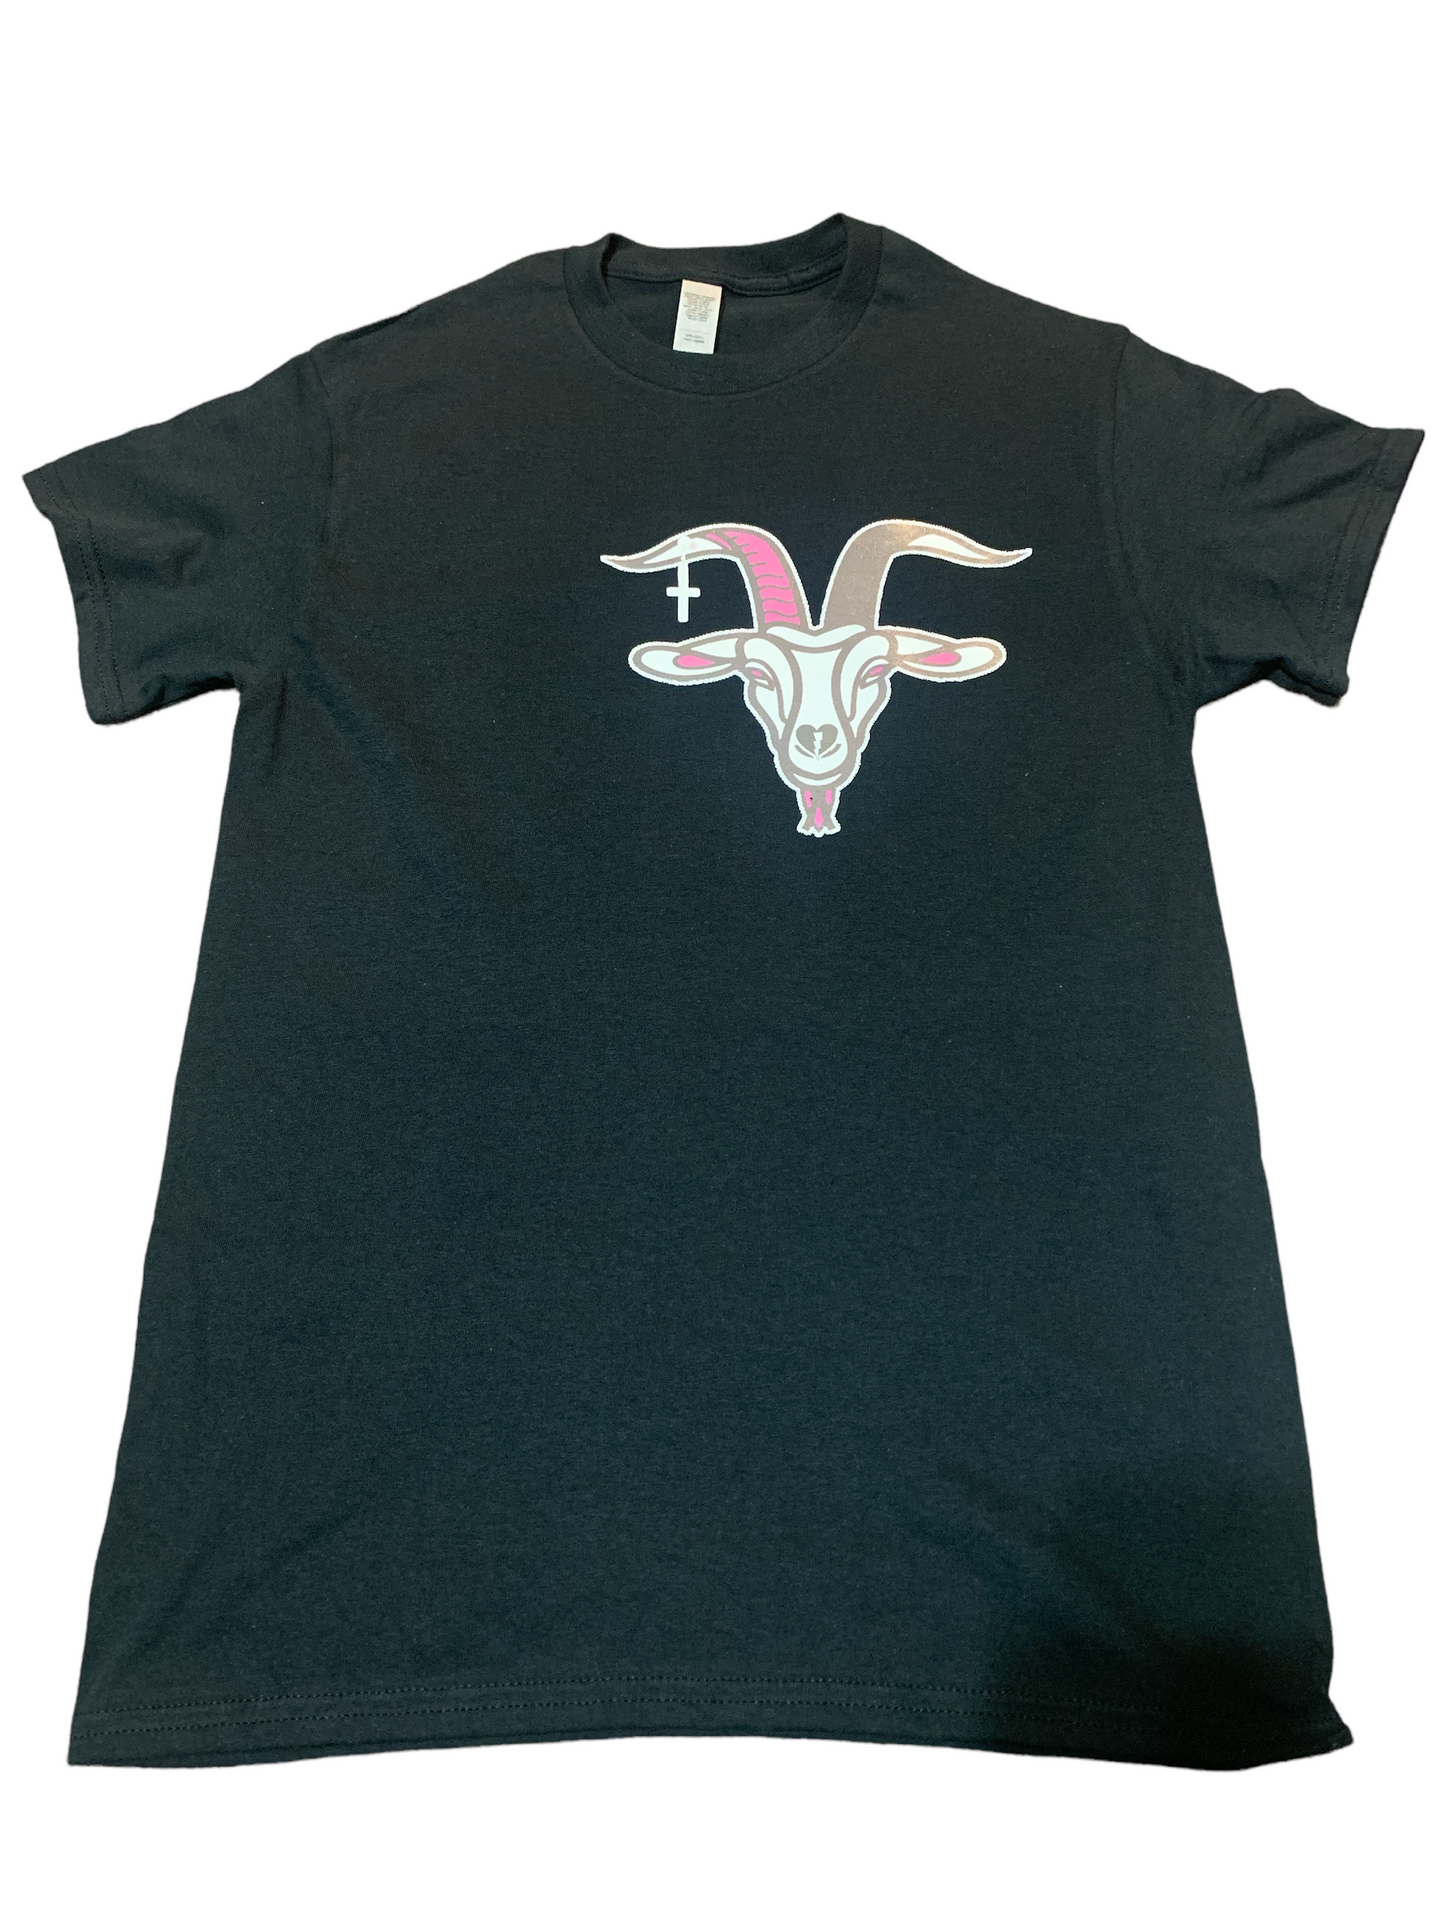 Lil Goat T-Shirt (Spring Collection)